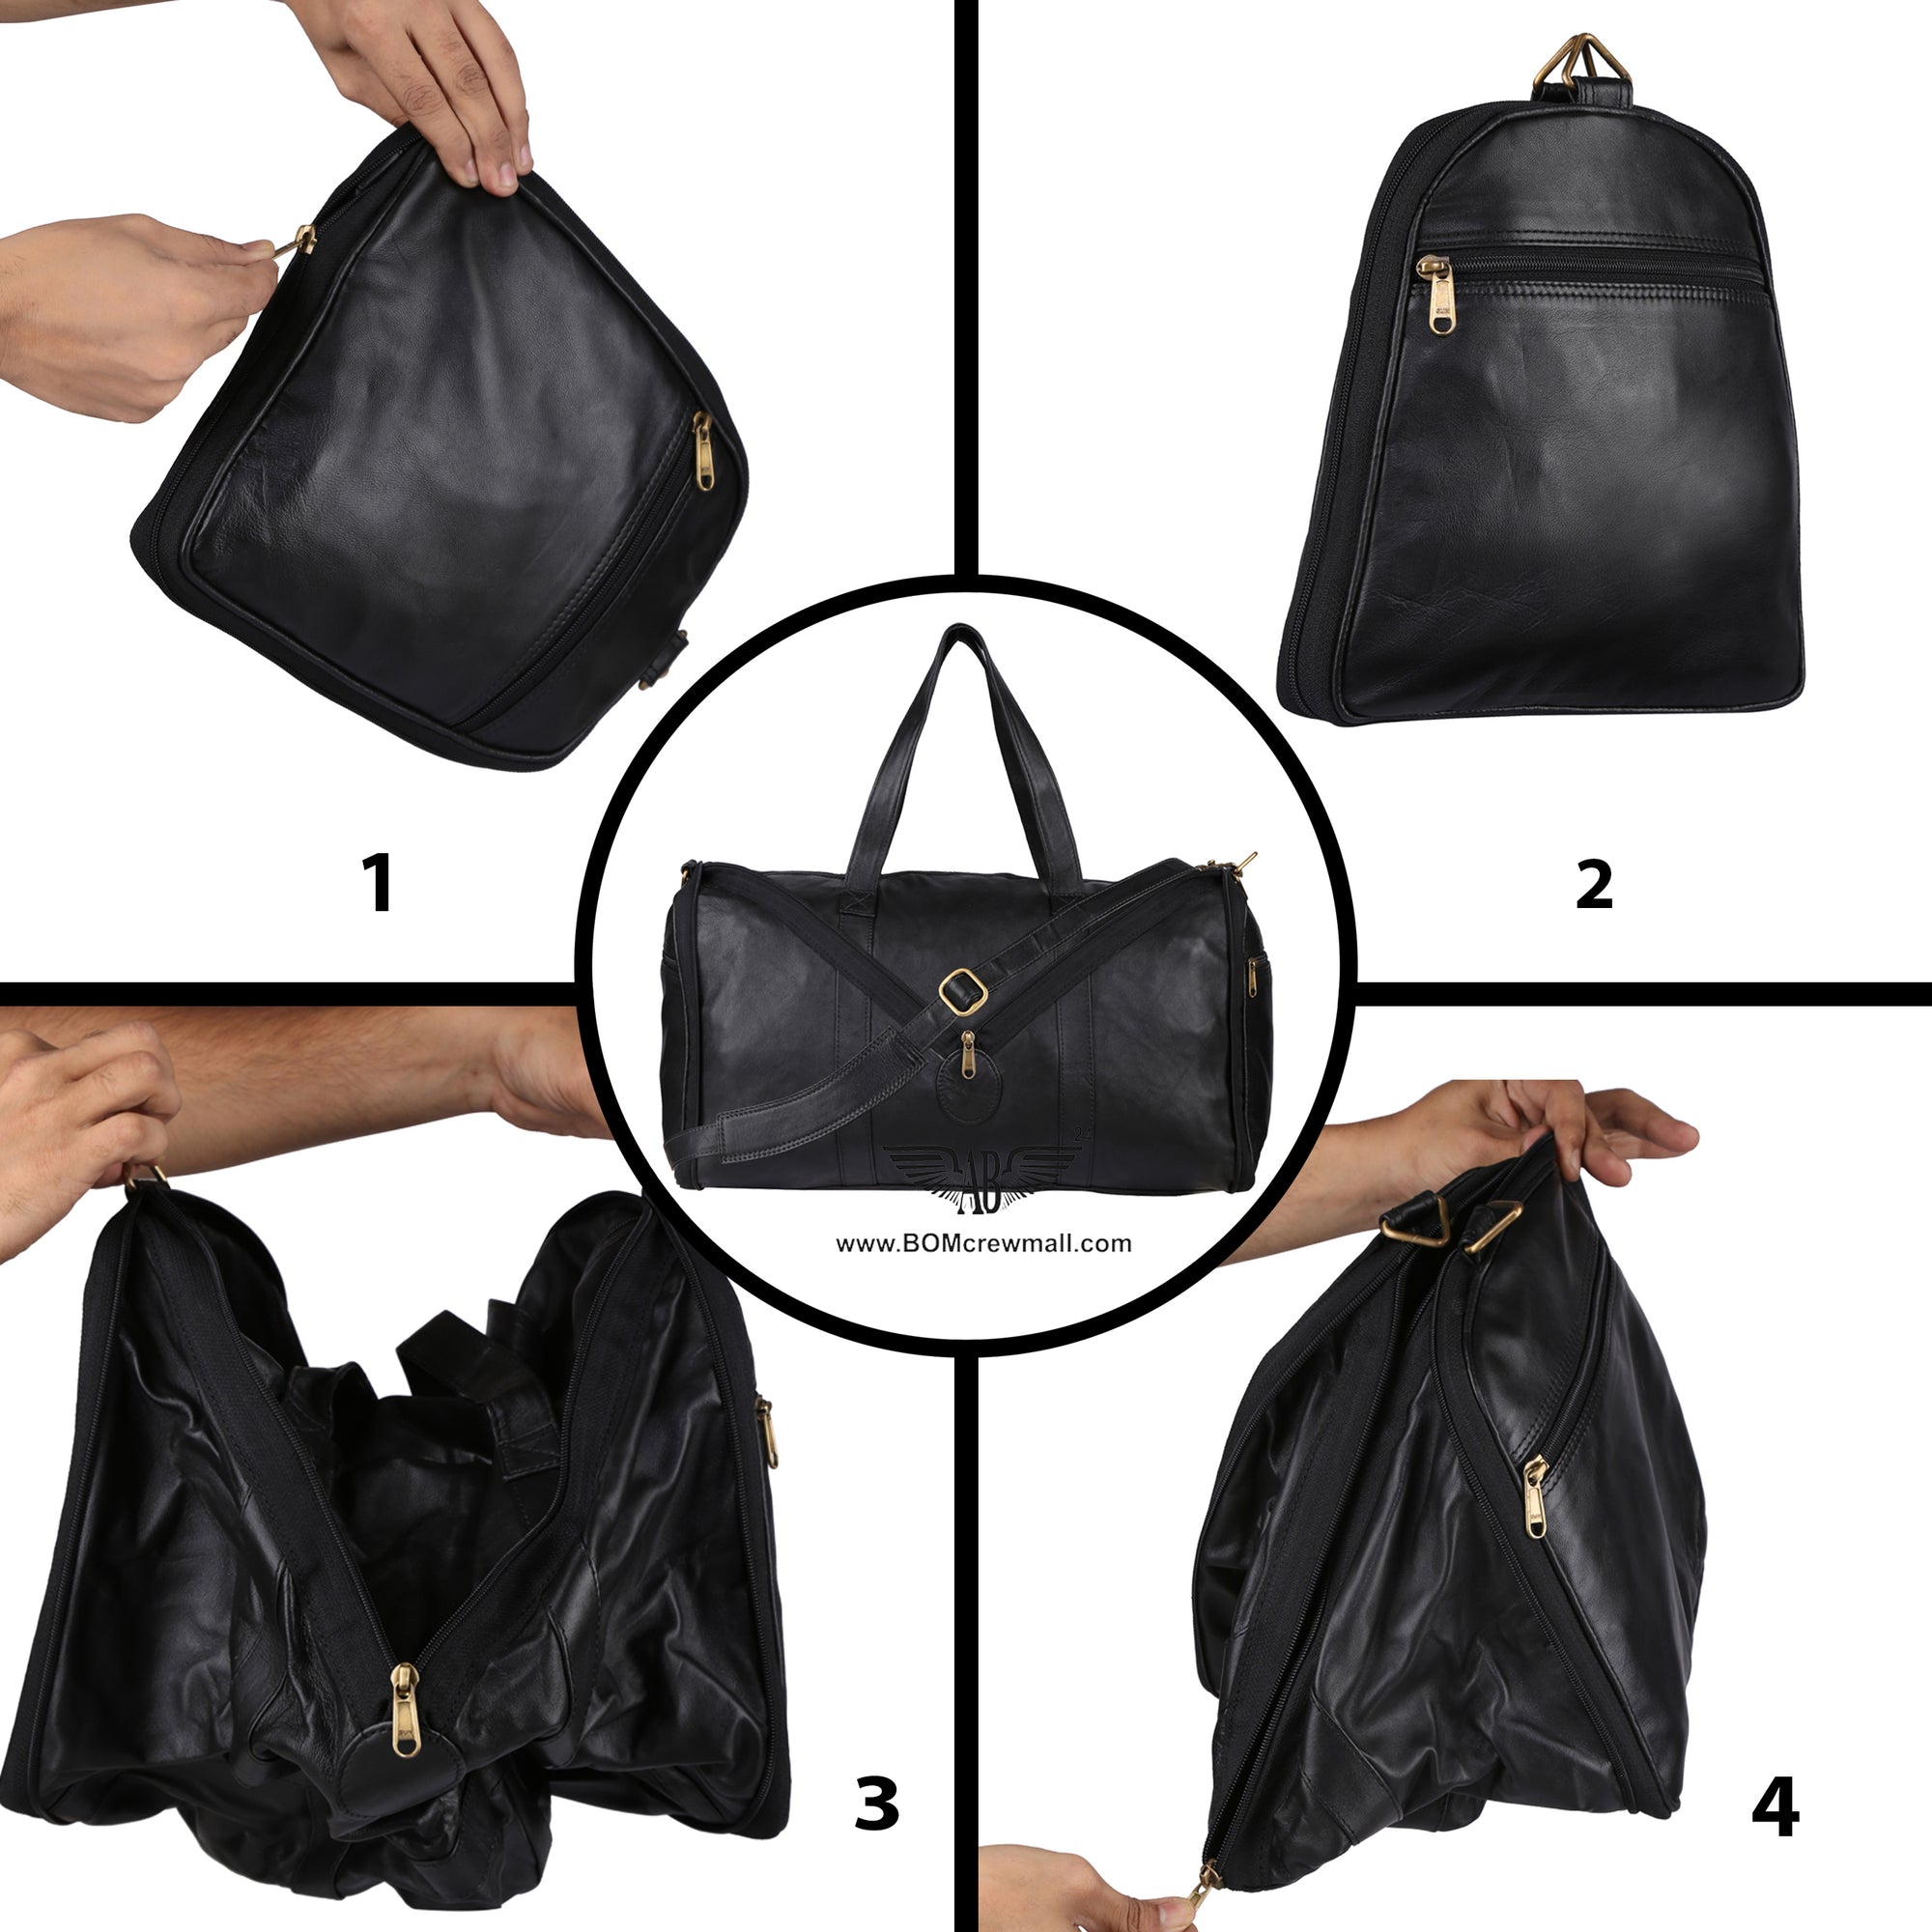 multiple images of FOLDING TOTE BAG. It is depicting its different usage